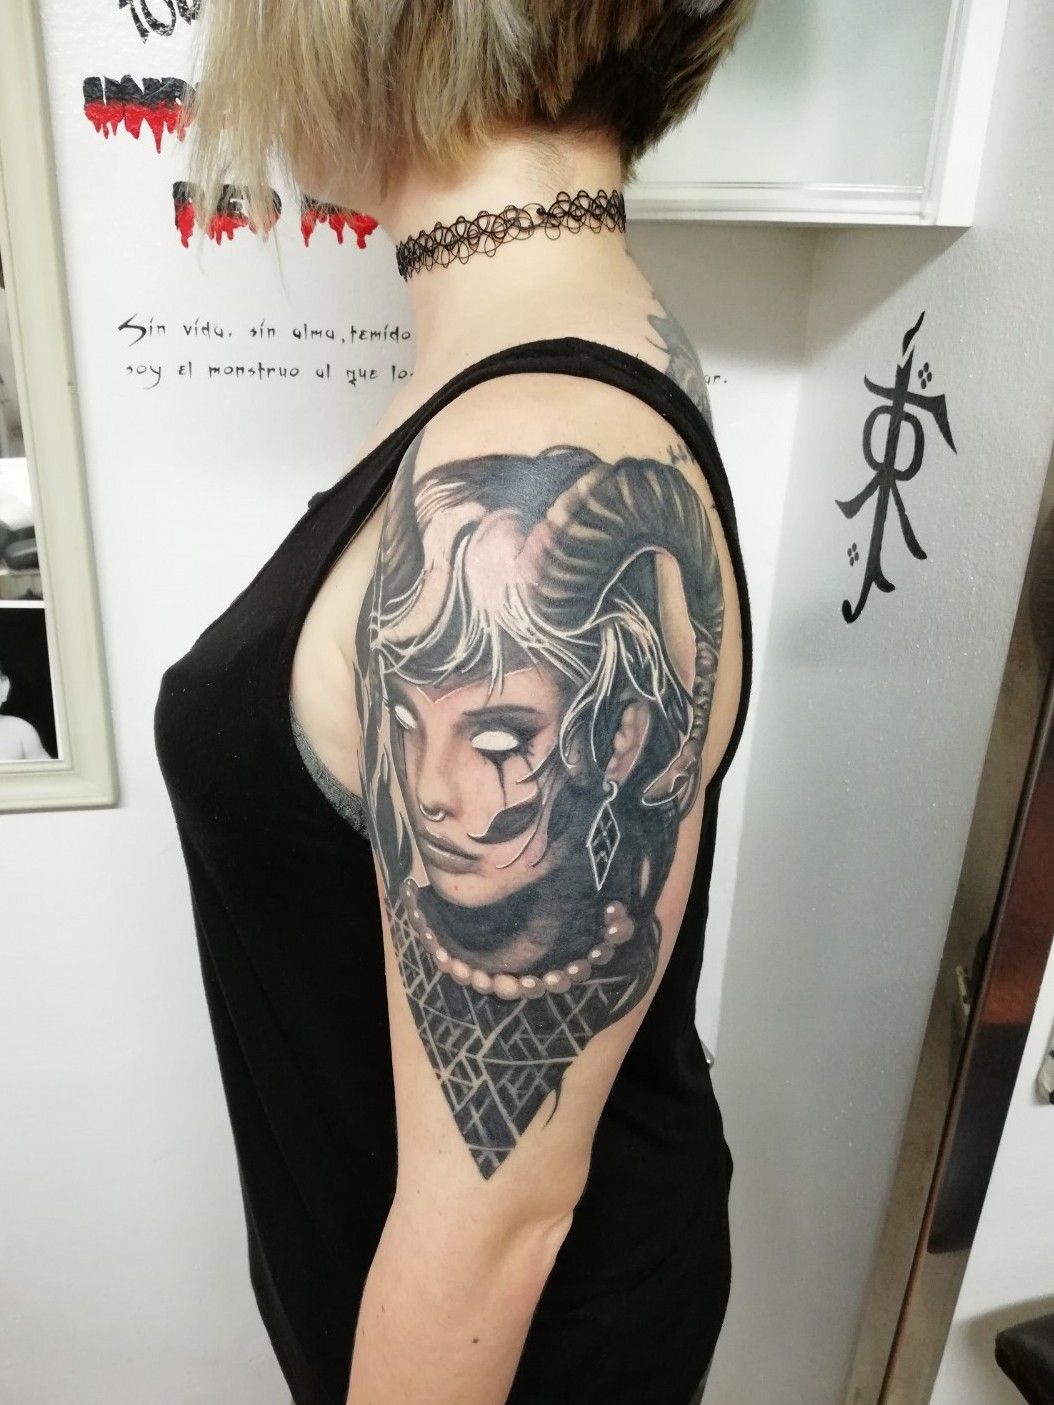 Tattoo Designs Inspired By A Japanese Succubus Demon  Cultura Colectiva   Japanese tattoo Tattoos Tattoo designs